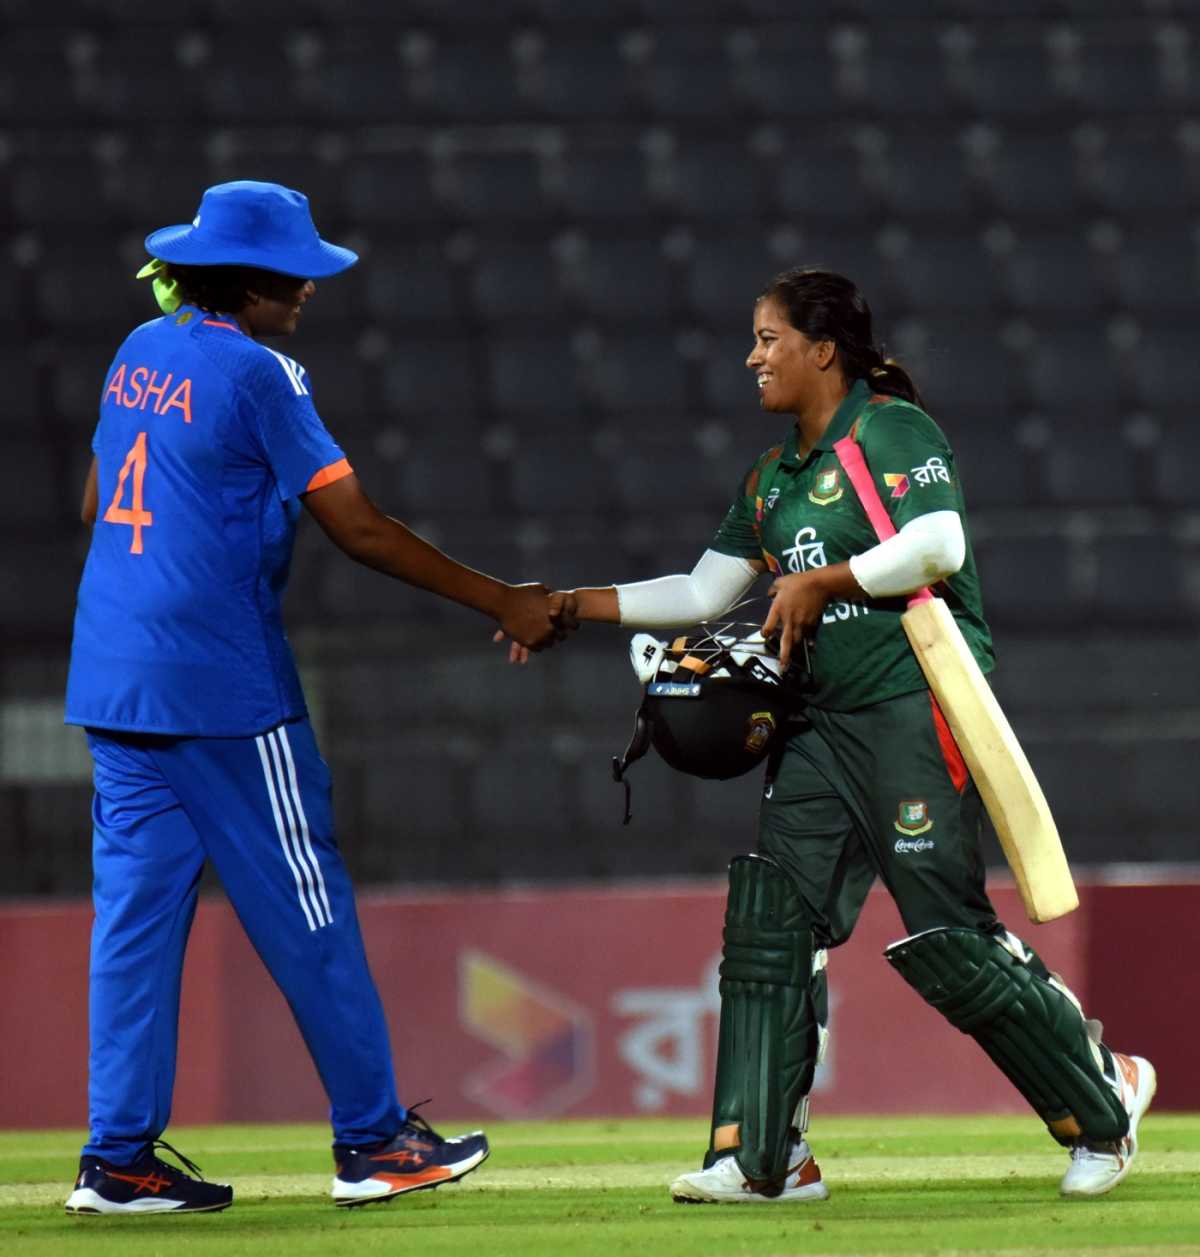 Debutant S Asha, who finished with 2 for 18, shakes hands with Nahida Akter